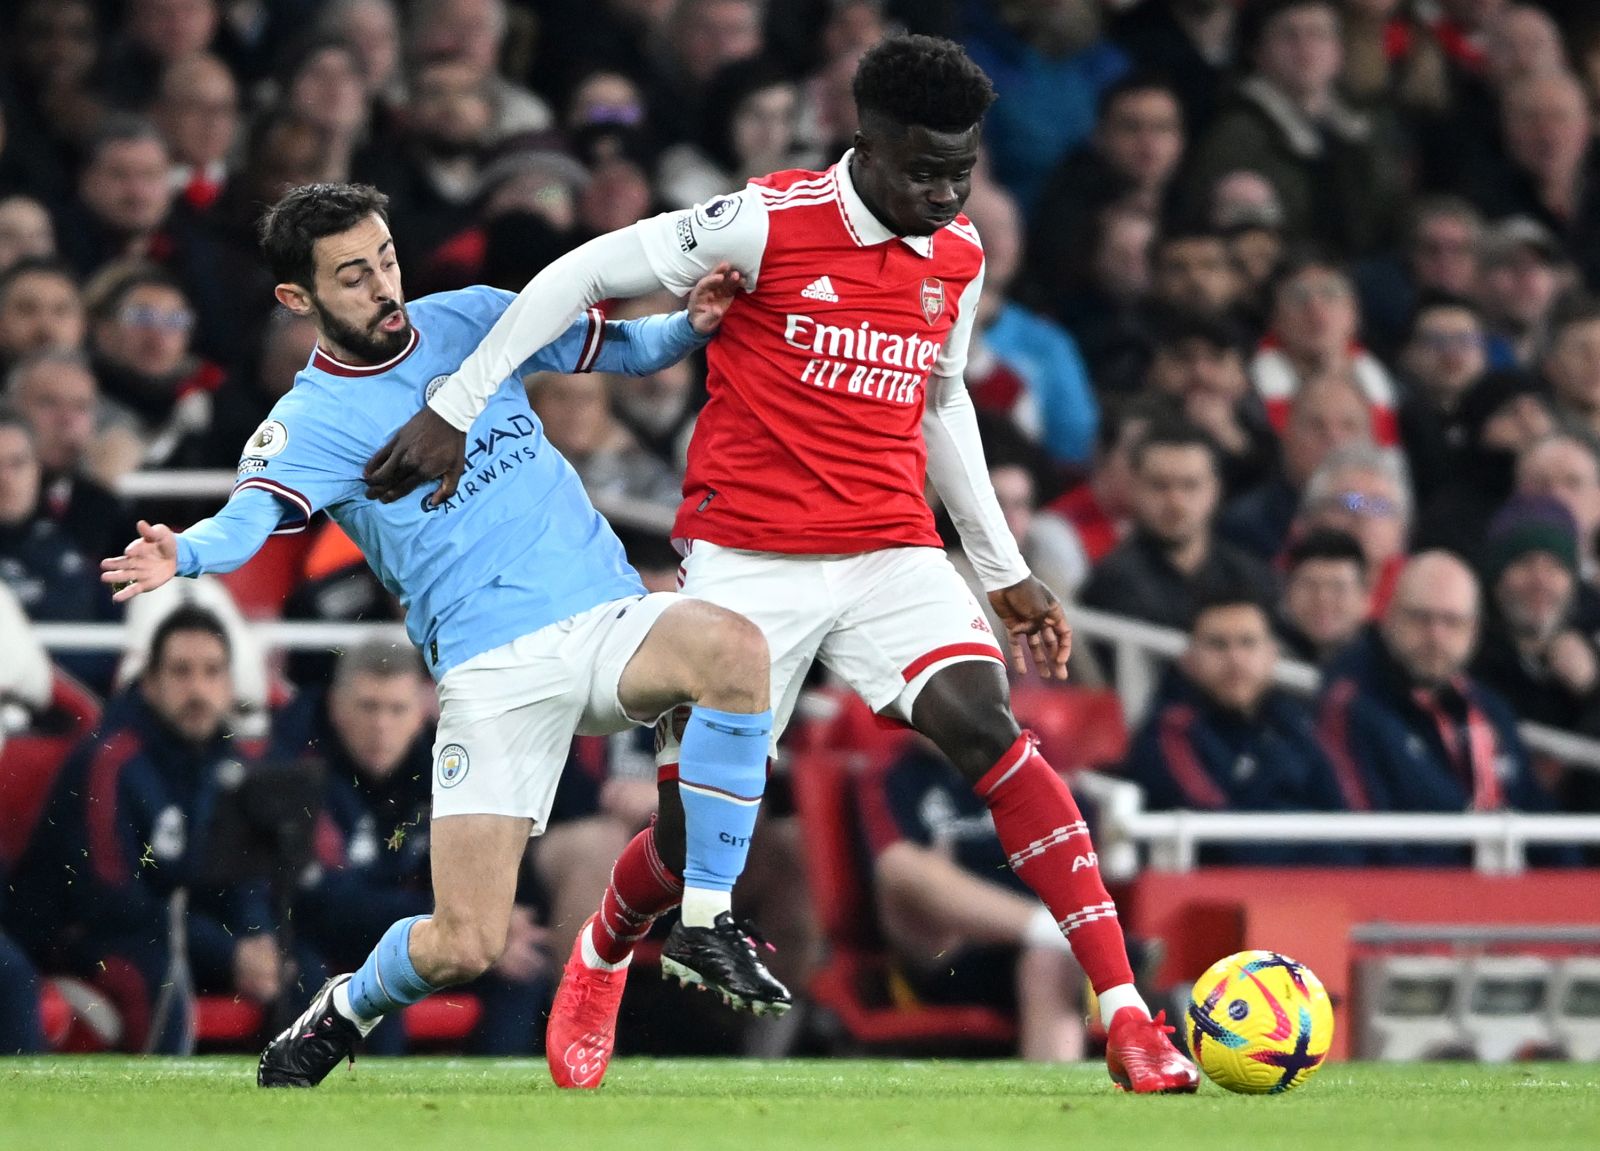 epa10468986 Bukayo Saka (R) of Arsenal in action against Bernardo Silva of Manchester City during the English Premier League soccer match between Arsenal London and Manchester City in London, Britain, 15 February 2023.  EPA/Daniel Hambury EDITORIAL USE ONLY. No use with unauthorized audio, video, data, fixture lists, club/league logos or 'live' services. Online in-match use limited to 120 images, no video emulation. No use in betting, games or single club/league/player publications